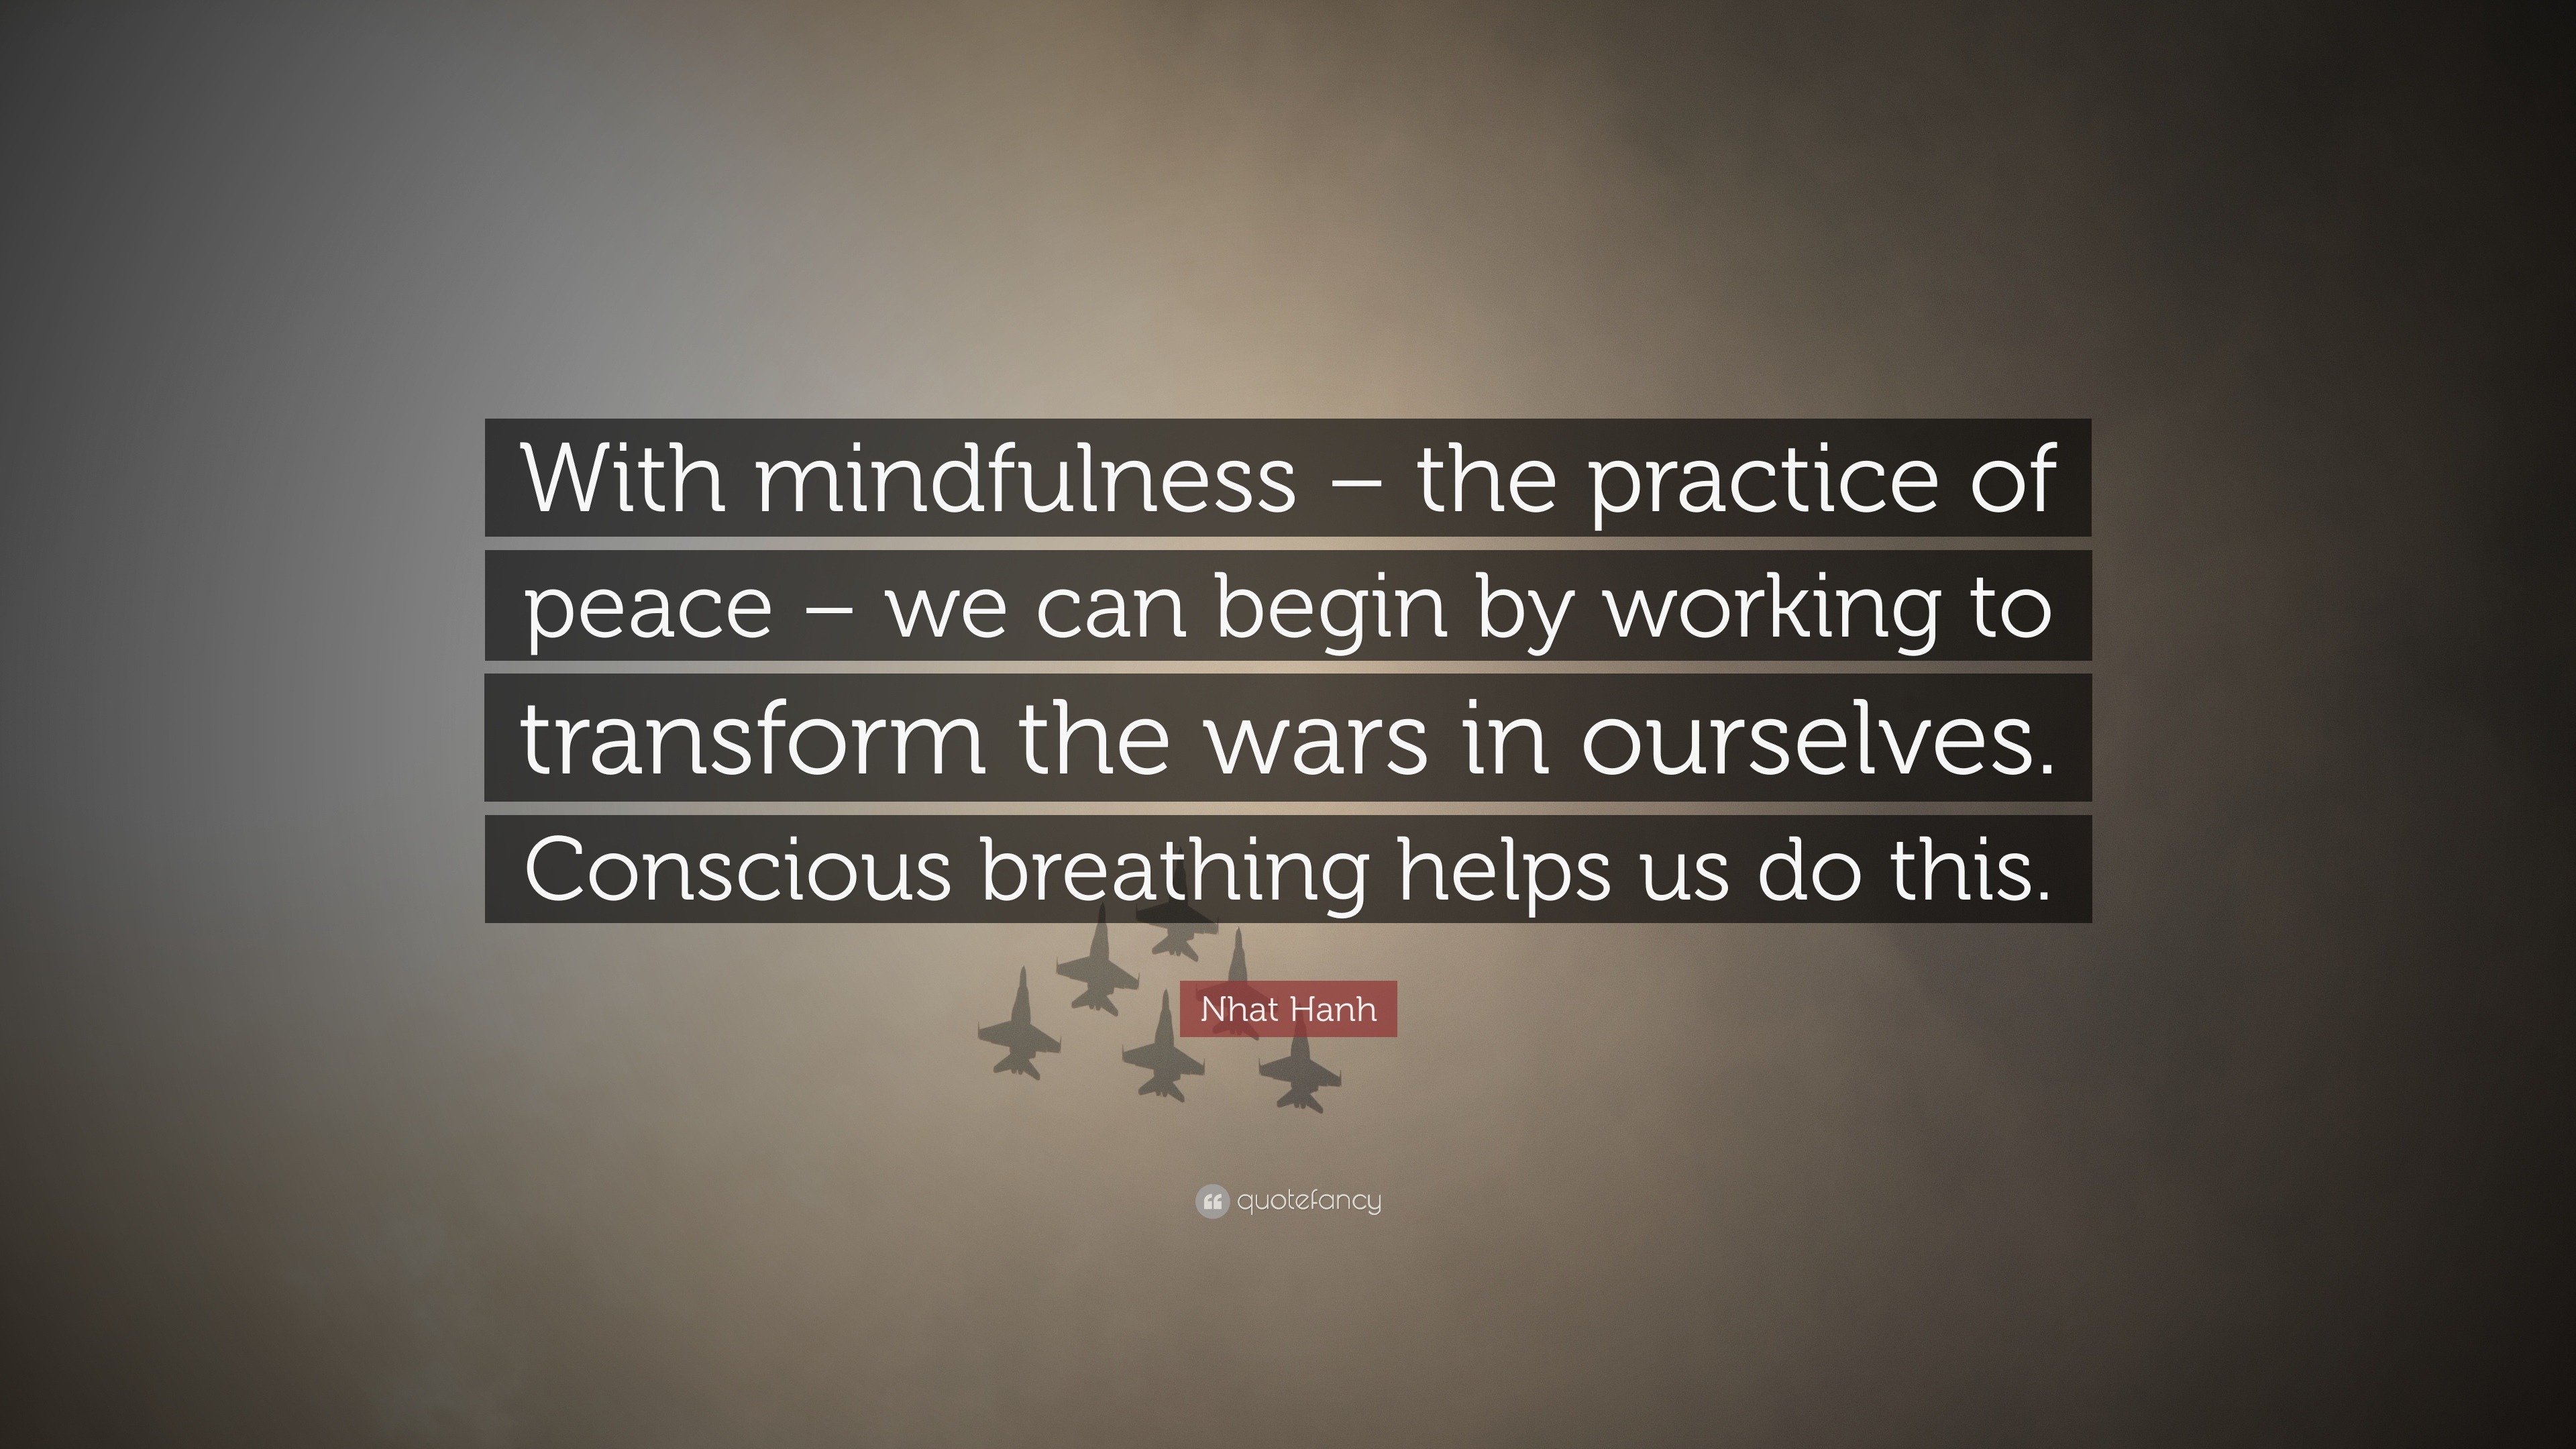 Nhat Hanh Quote “With mindfulness – the practice of peace – we can begin